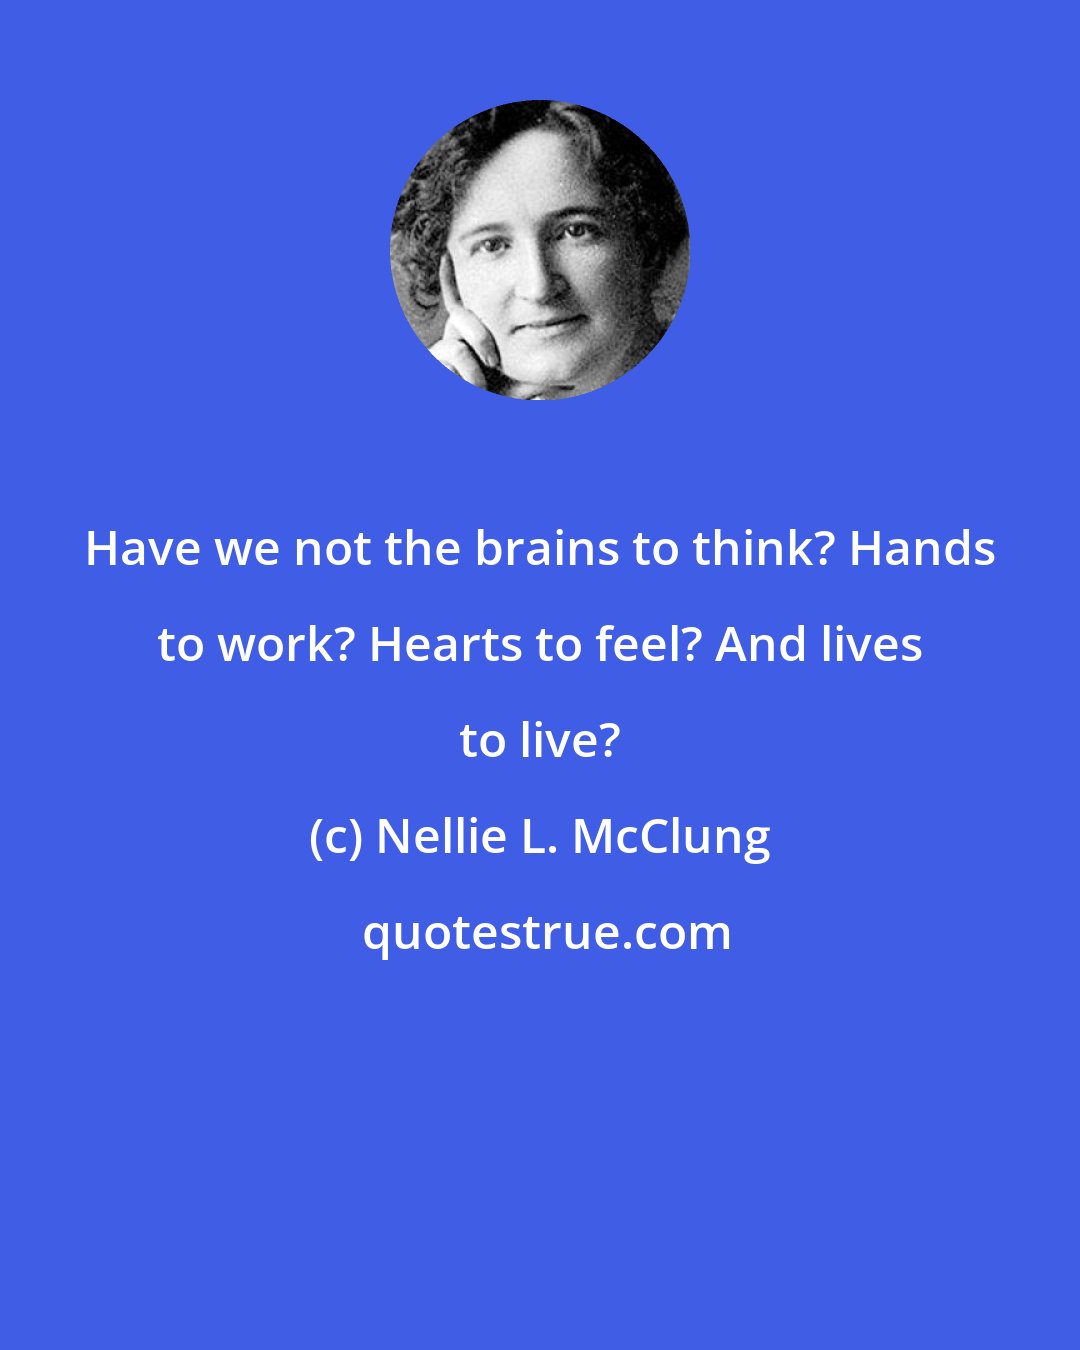 Nellie L. McClung: Have we not the brains to think? Hands to work? Hearts to feel? And lives to live?